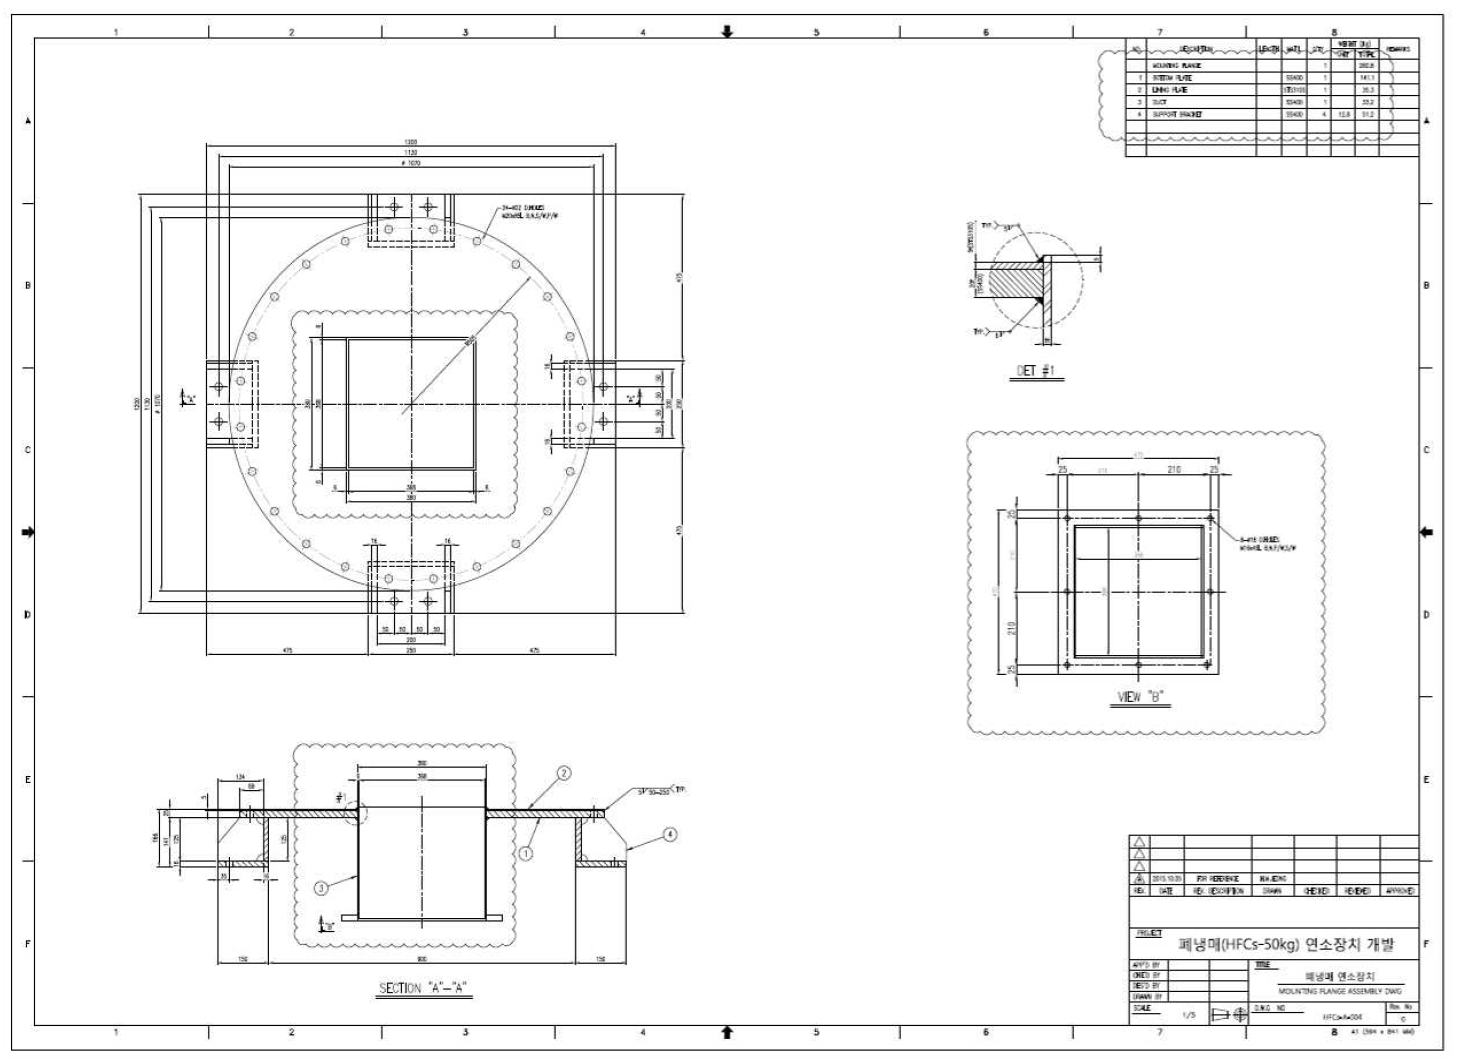 HFCs 전용 연소기 보조버너 Mounting Flange Assembly Drawing